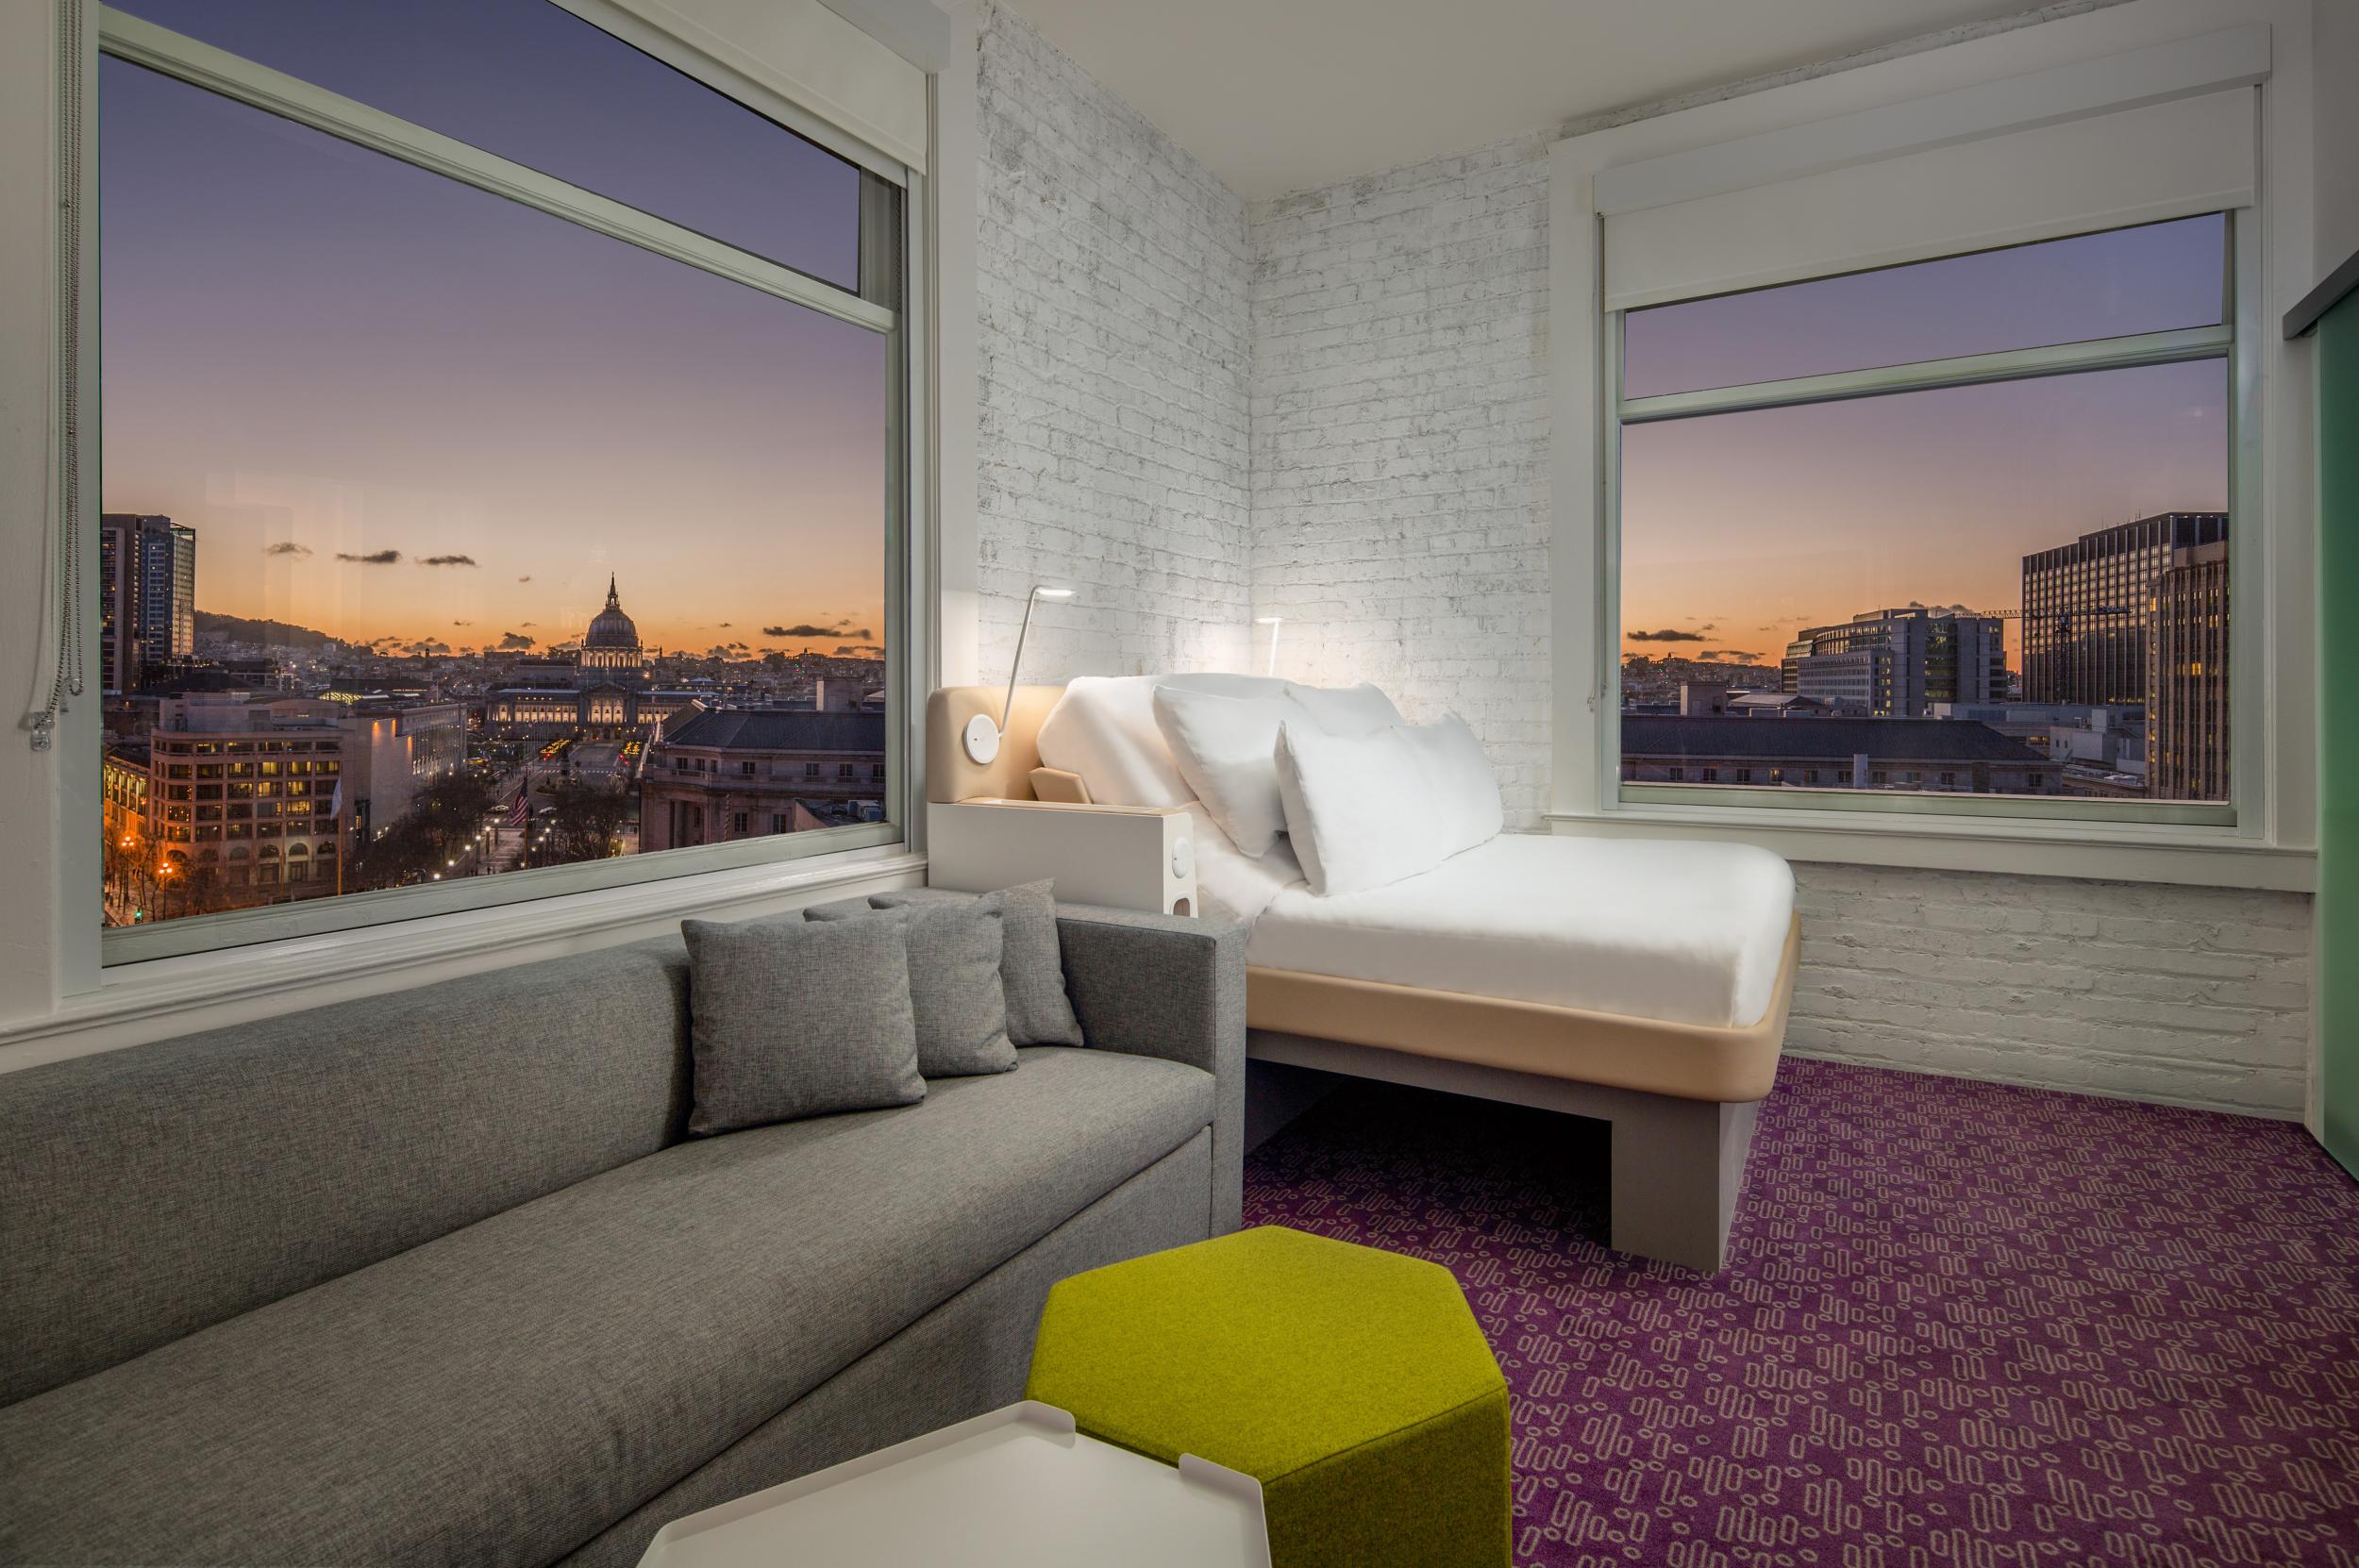 The Yotel is ideal for those looking to keep costs down